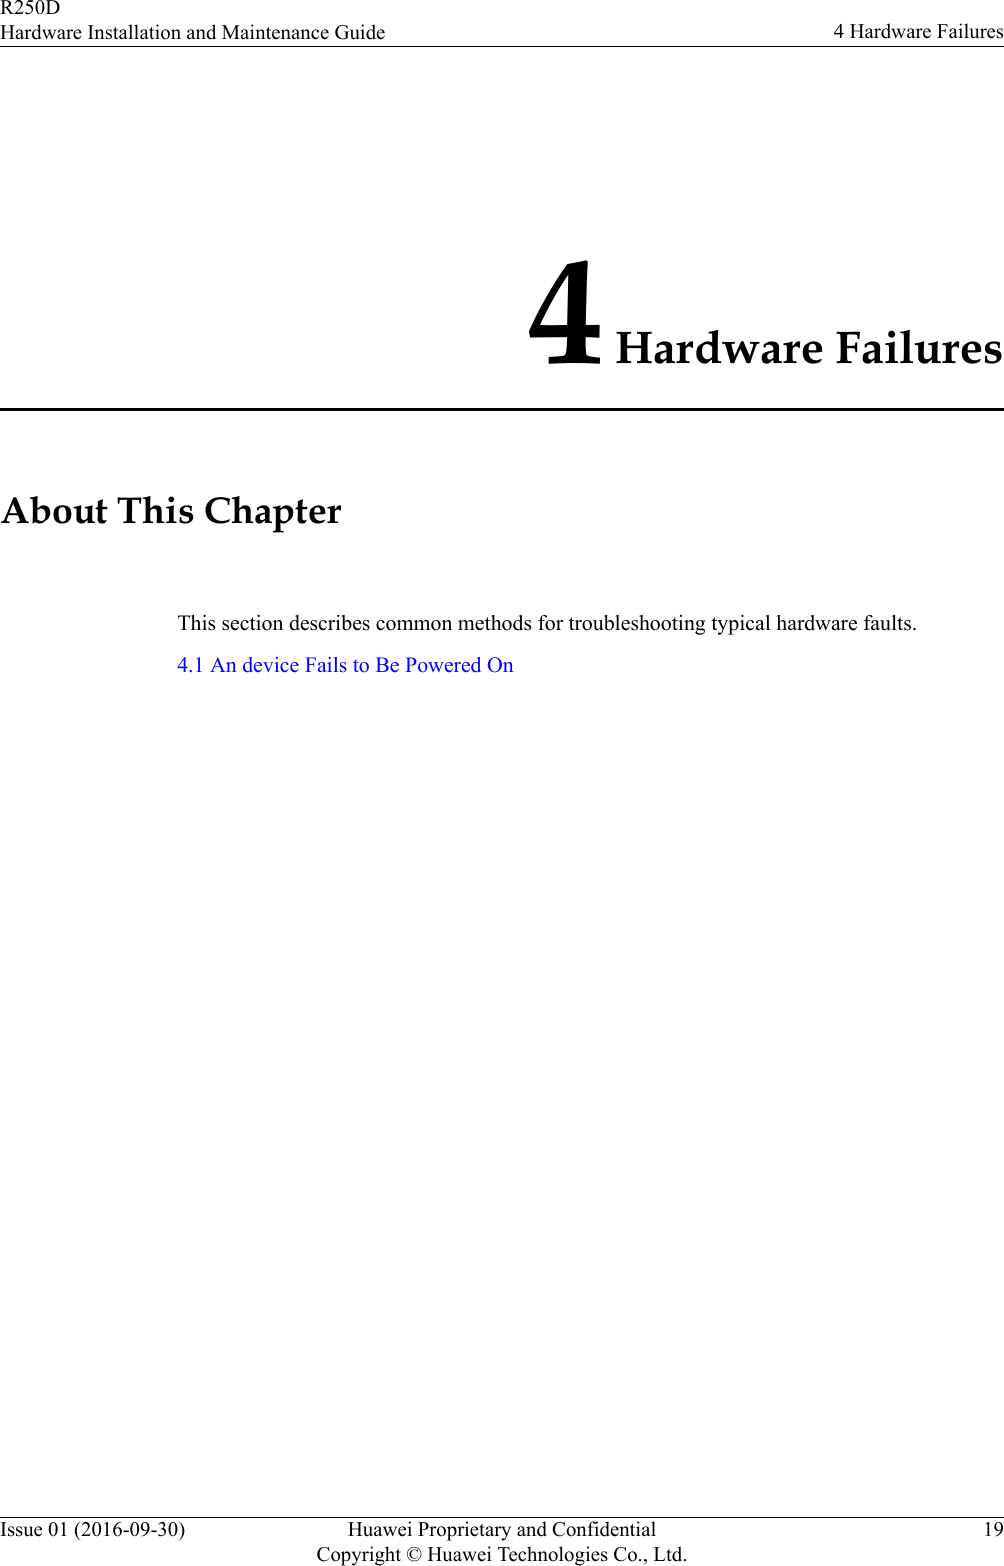 4 Hardware FailuresAbout This ChapterThis section describes common methods for troubleshooting typical hardware faults.4.1 An device Fails to Be Powered OnR250DHardware Installation and Maintenance Guide 4 Hardware FailuresIssue 01 (2016-09-30) Huawei Proprietary and ConfidentialCopyright © Huawei Technologies Co., Ltd.19